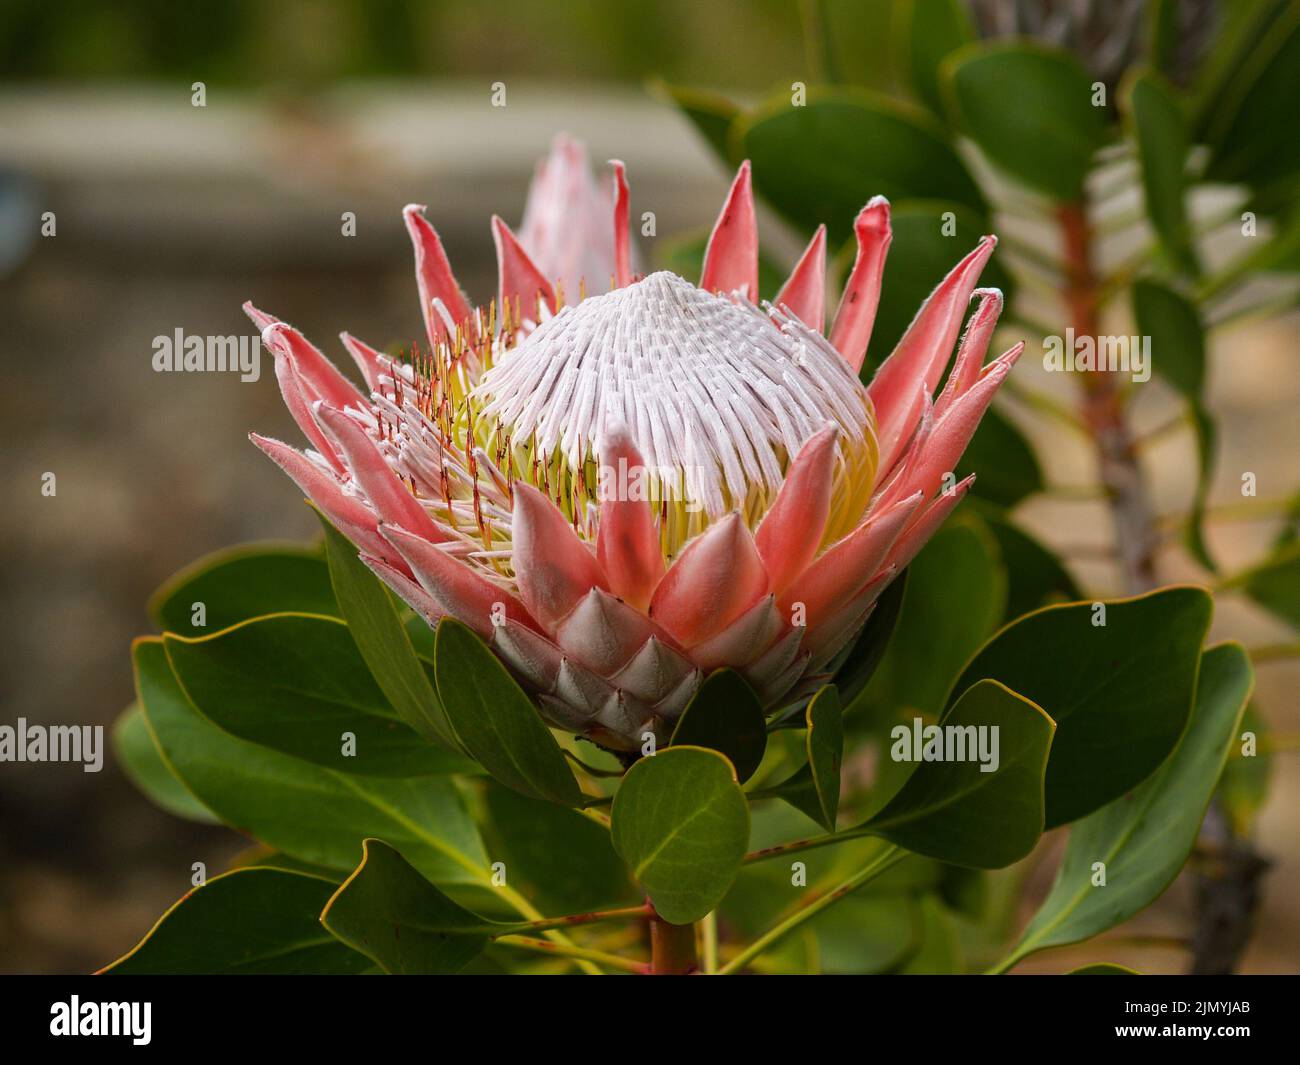 King protea flower in full bloom close-up Stock Photo